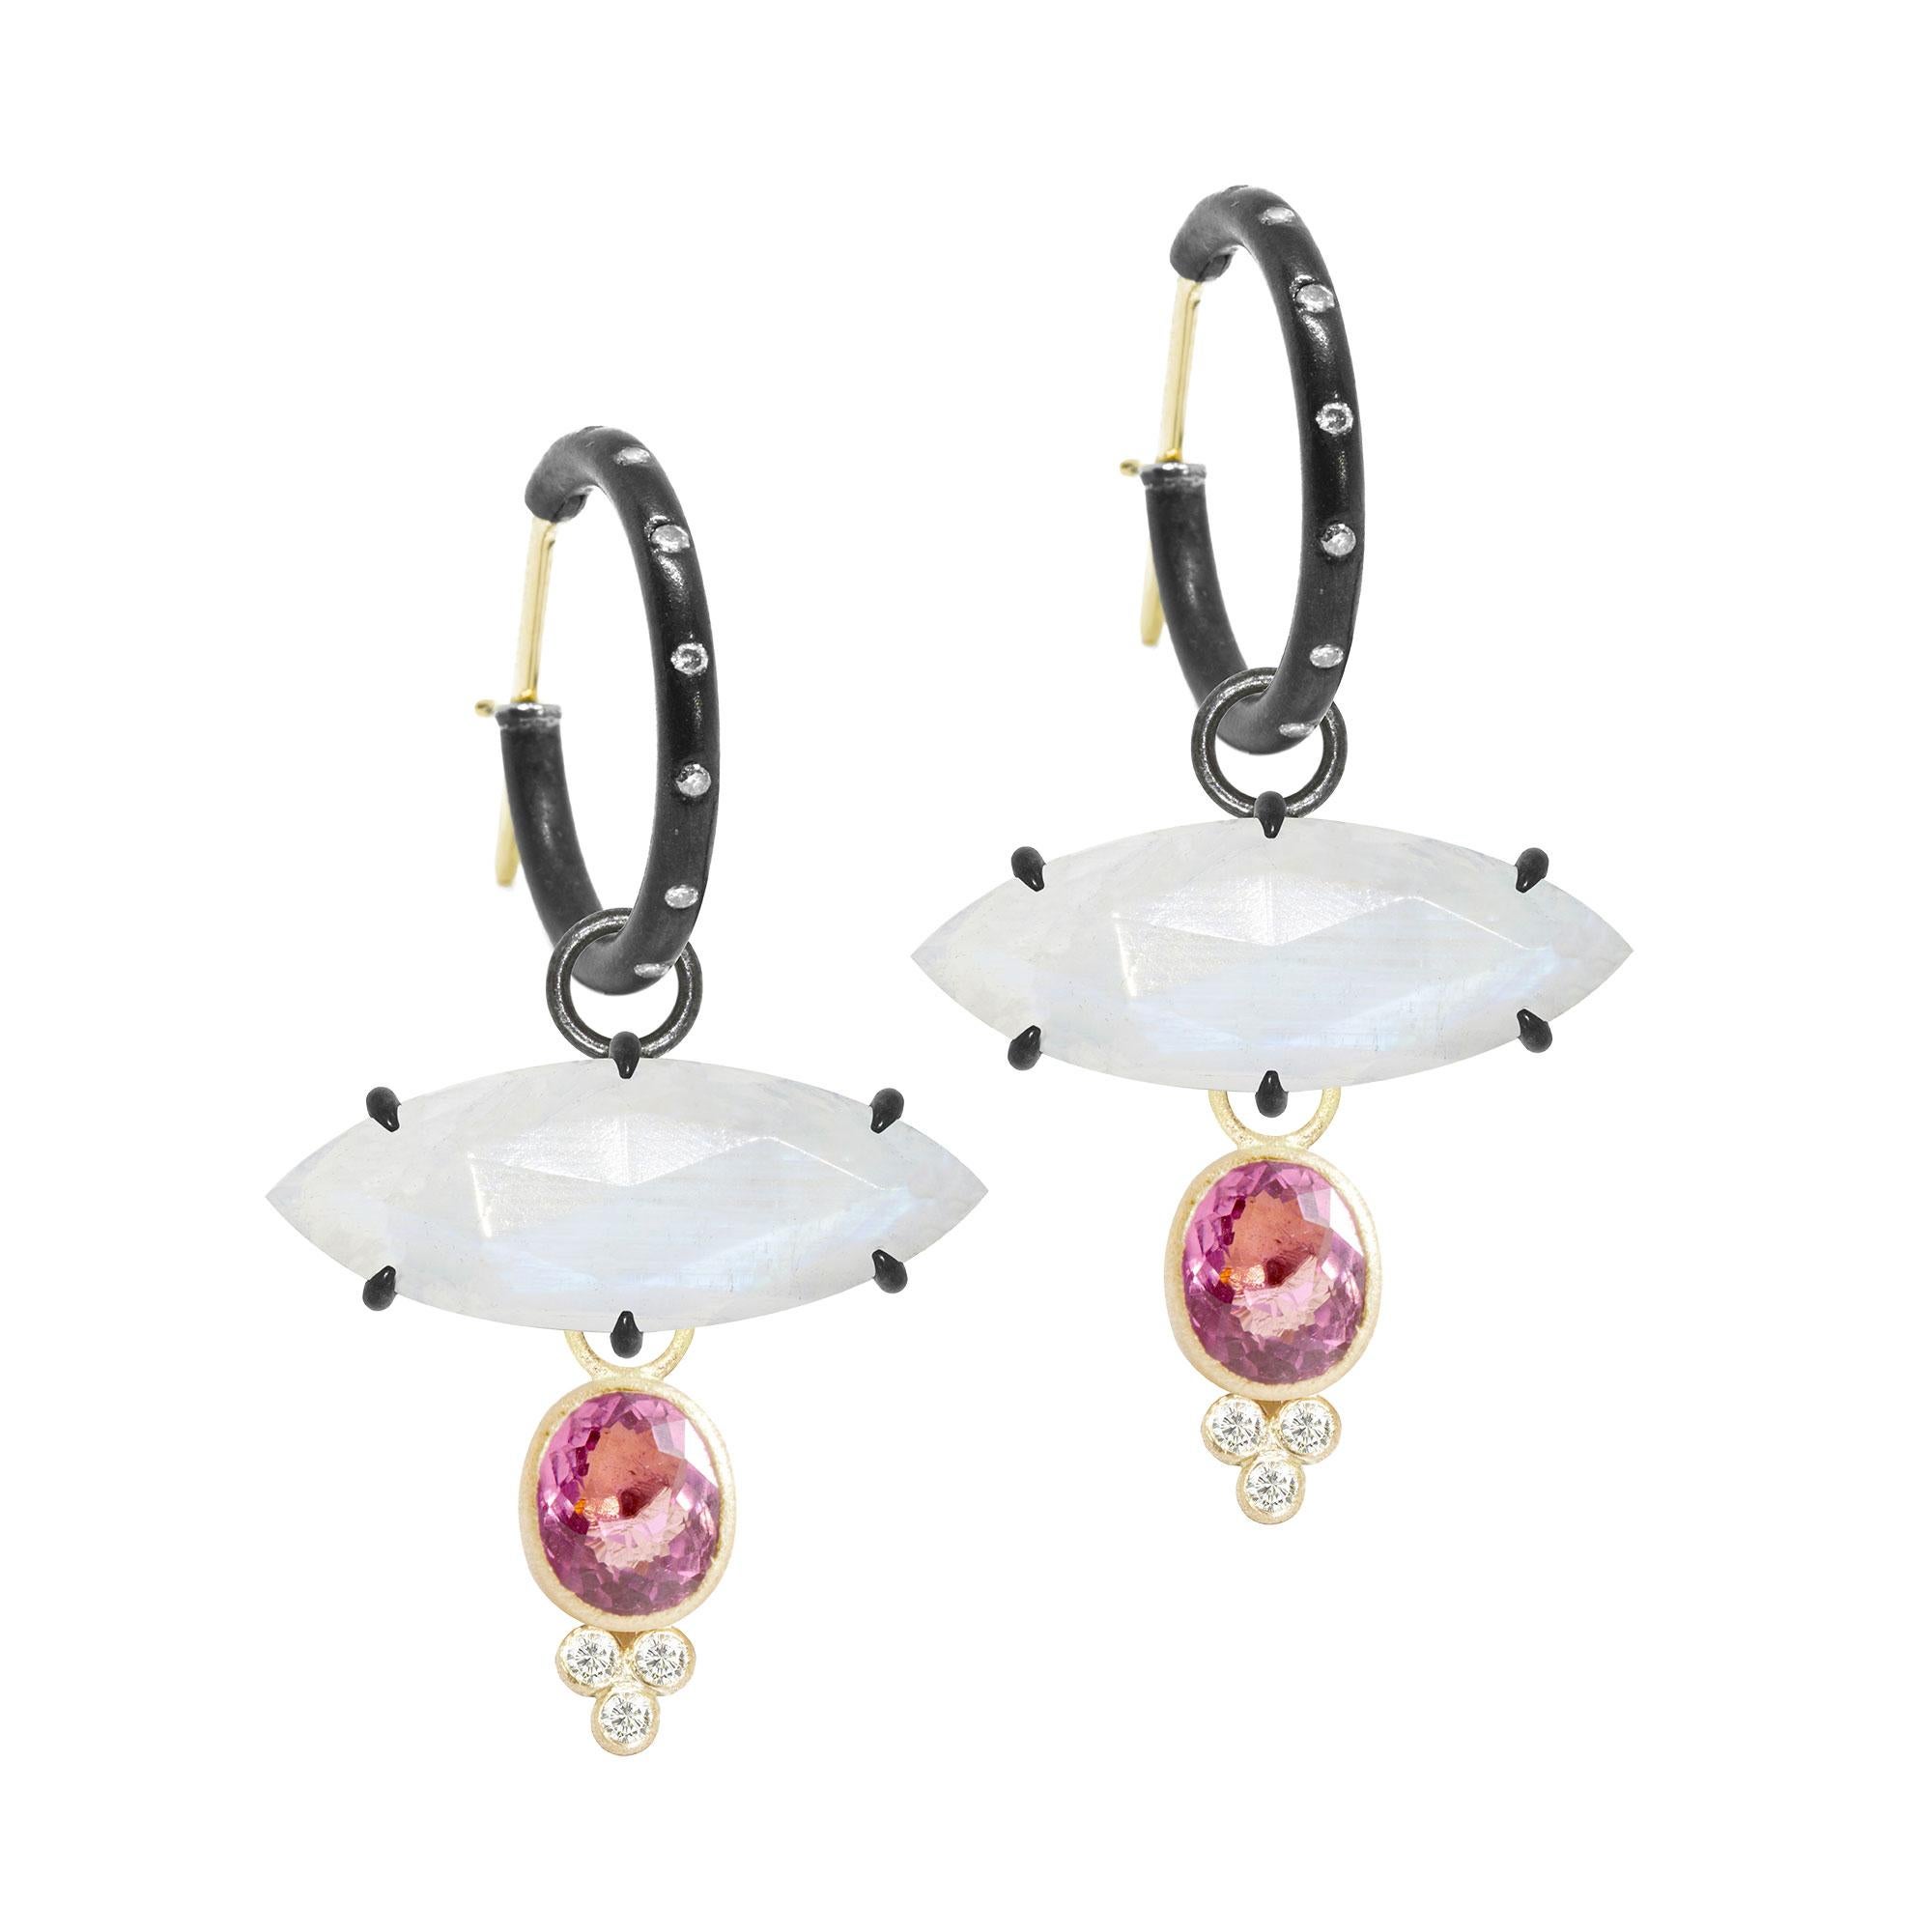 Designed with bezel-set pink tourmaline stones, the diamond-accented Lilly Gold Charms embrace the shape of a drop of water—an essential element for life—and bring a little edge to any of our hoop styles.
Nina Nguyen Design's patent-pending earrings